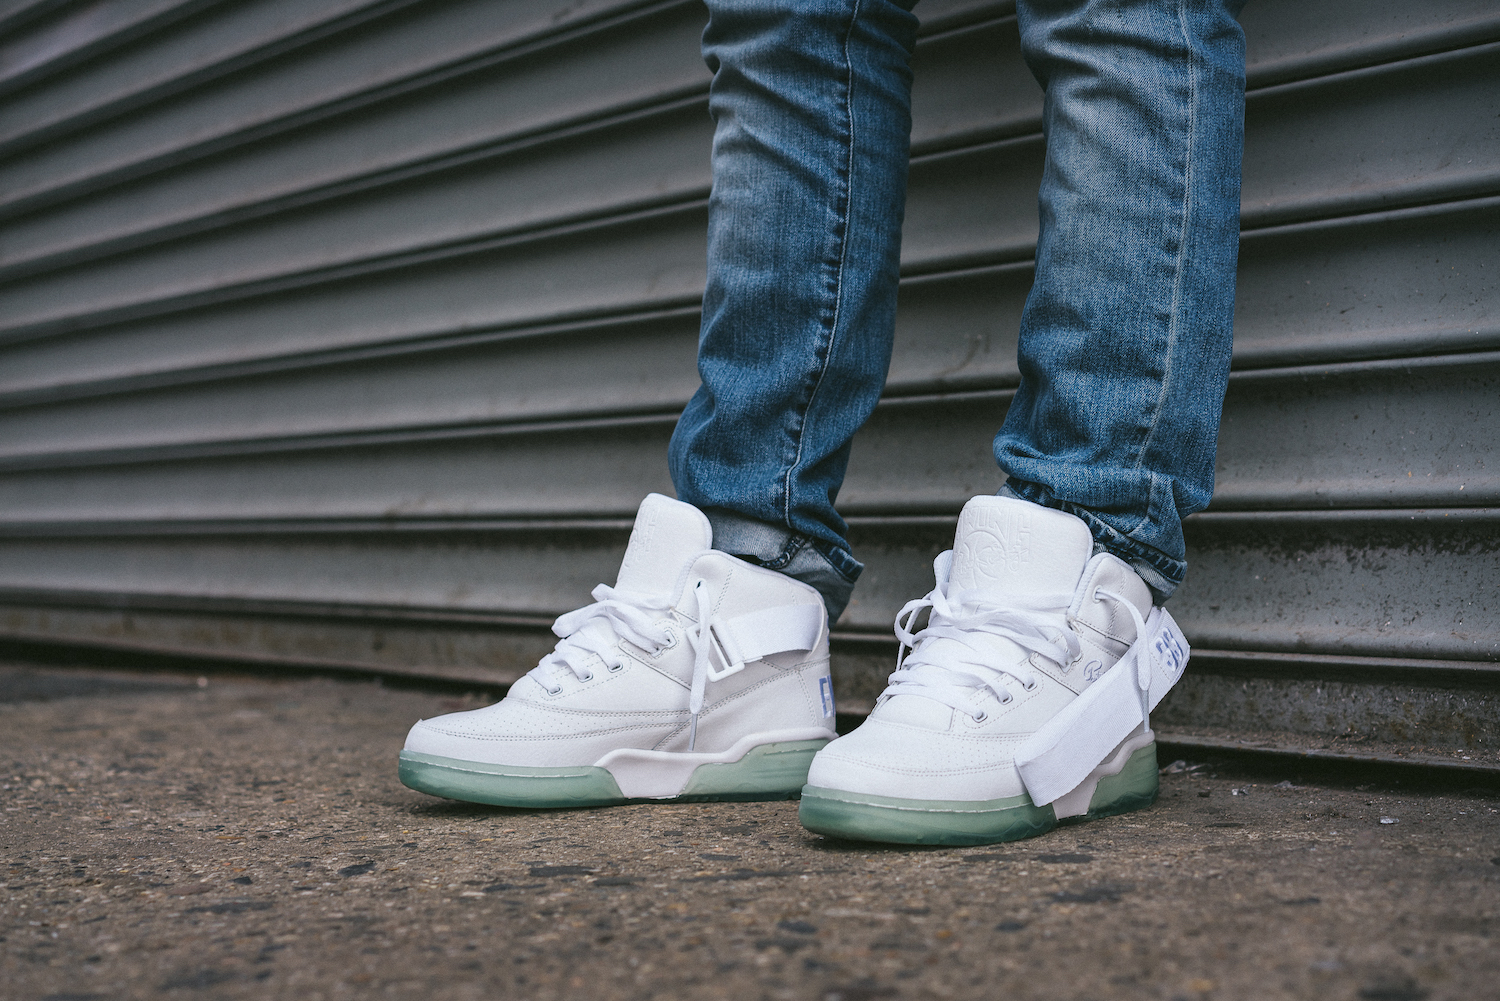 ewing 33 mid white ice may retro collection 2